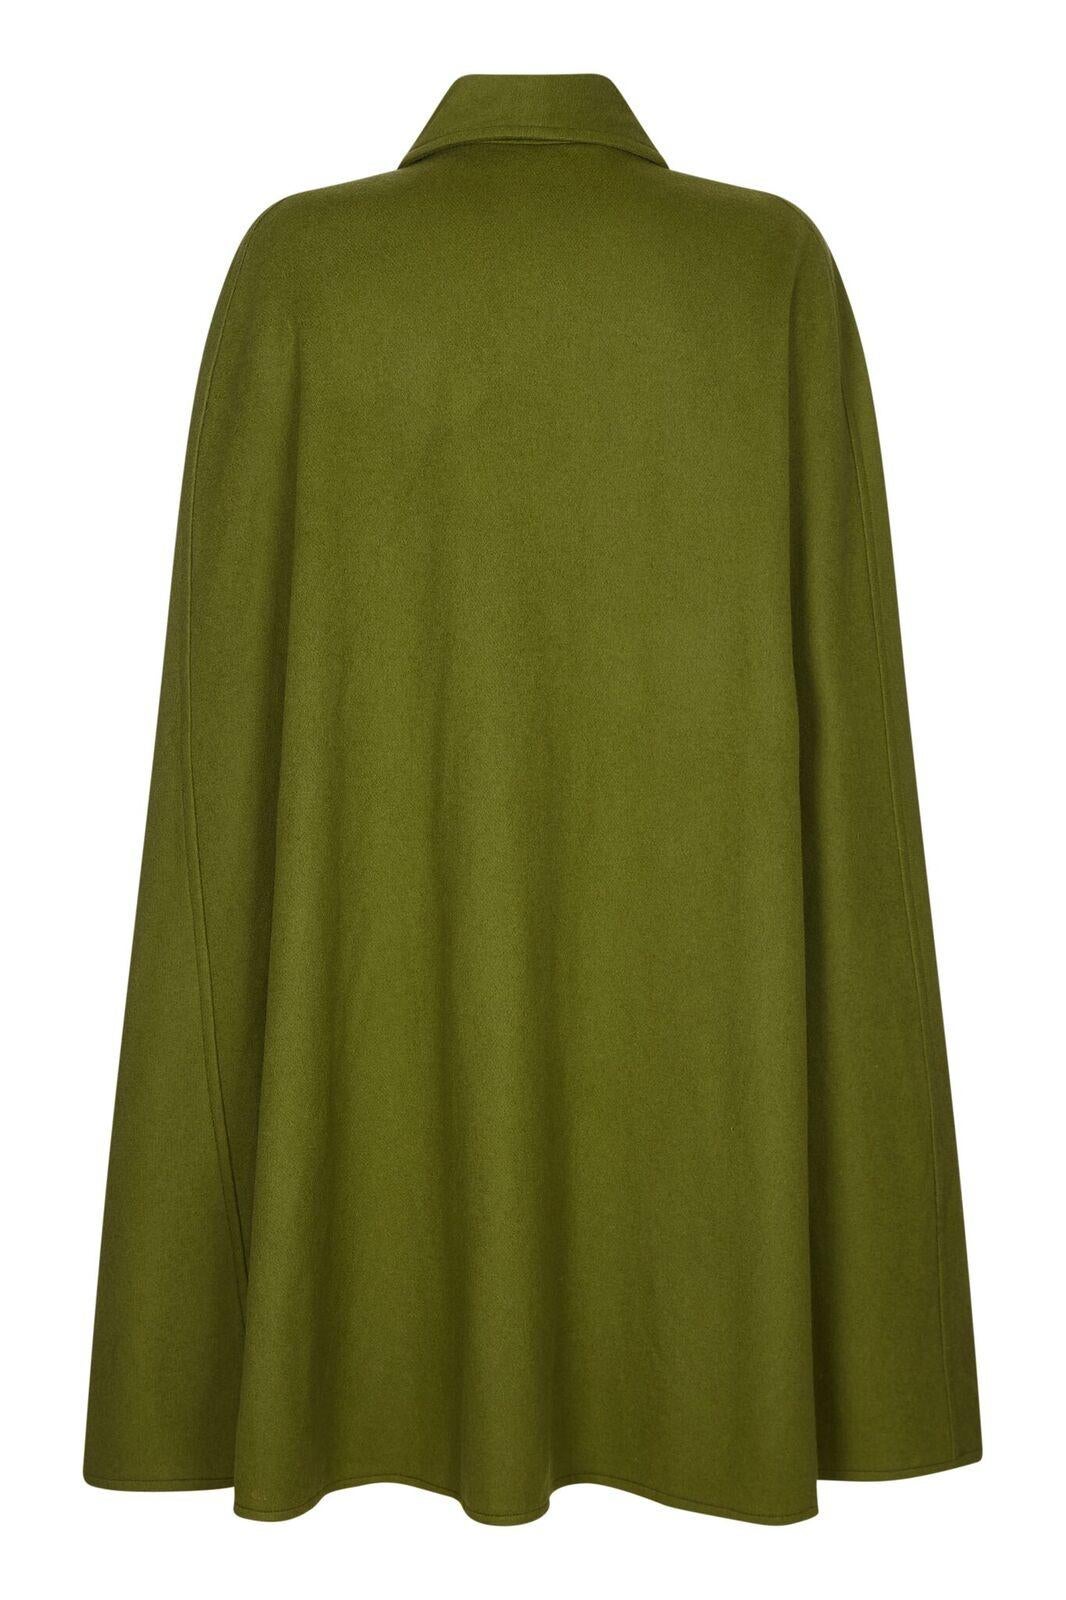 This magnificent Yves Saint Laurent woollen cape could be from the extolled 1976-77 Russian collection and is of exceptional quality. The pure wool fabric in soft moss green falls easily over the shoulders and finishes at the mid calf. There is a